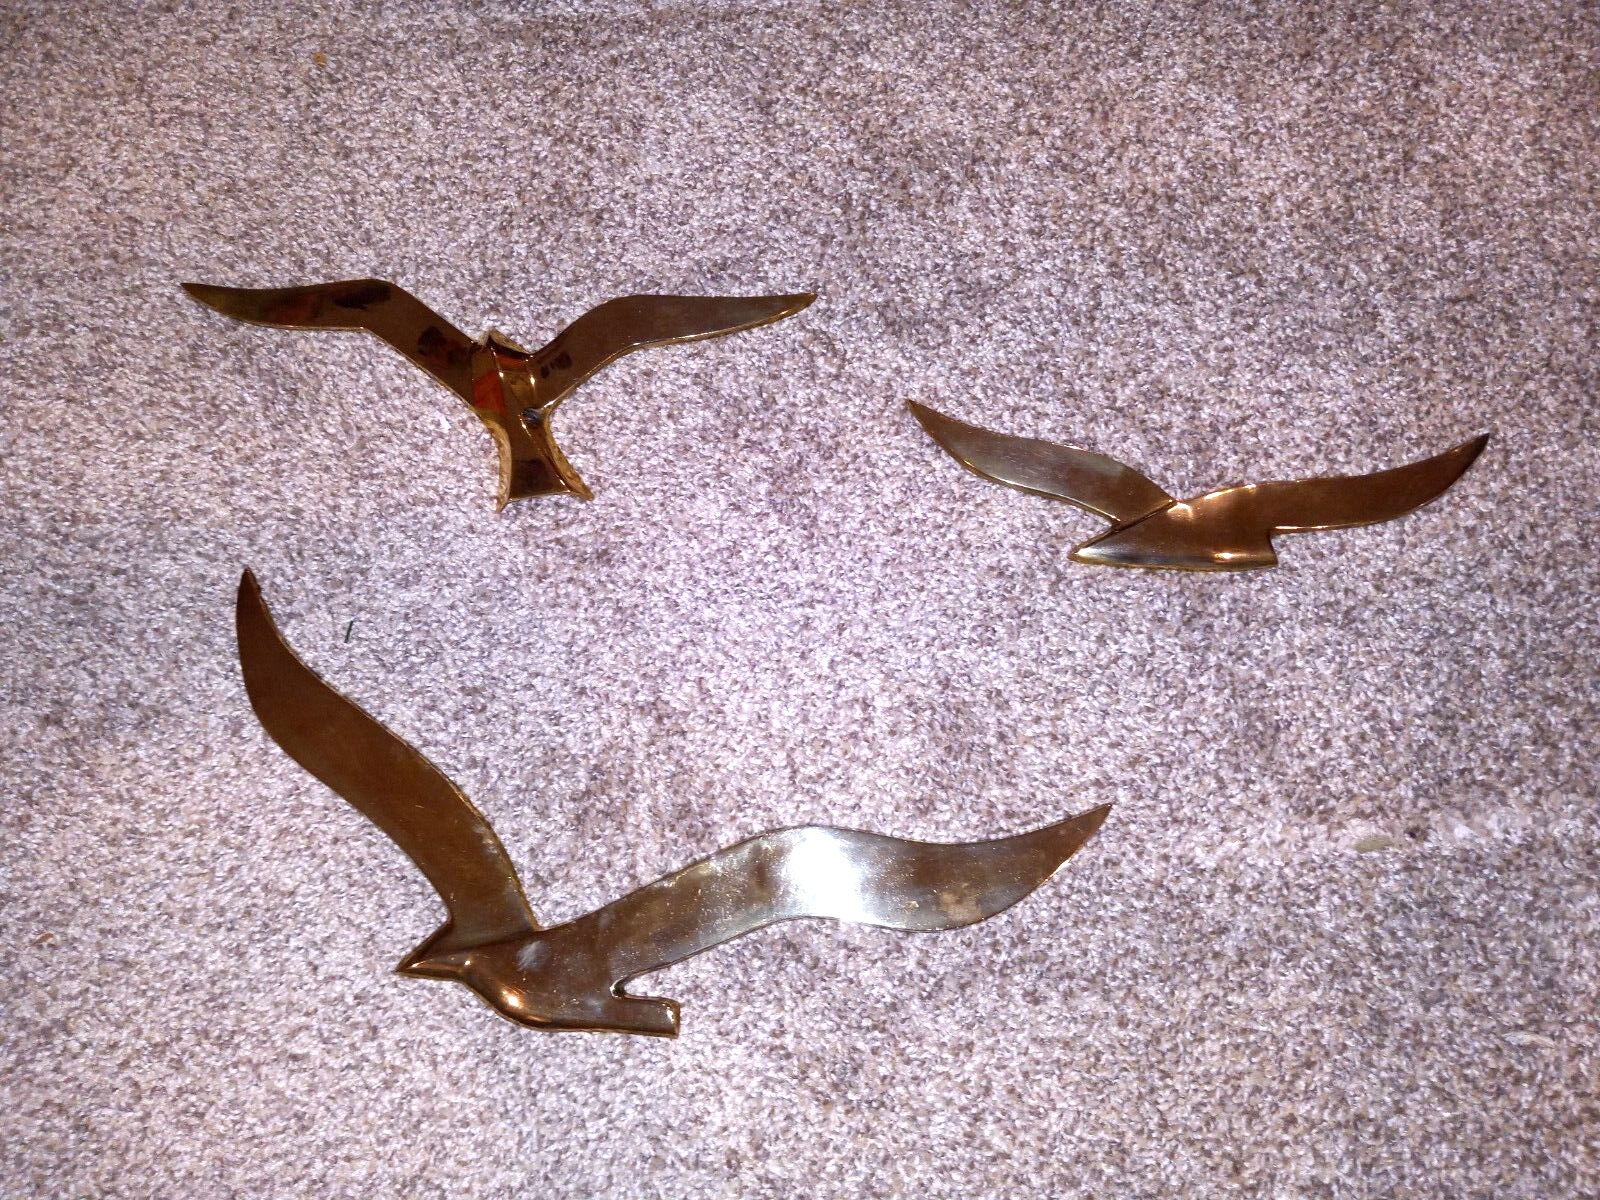 3 VERY OLD SOLID BRASS SEAGULLS WALL DECOR DISPLAYS, wing span 15.5